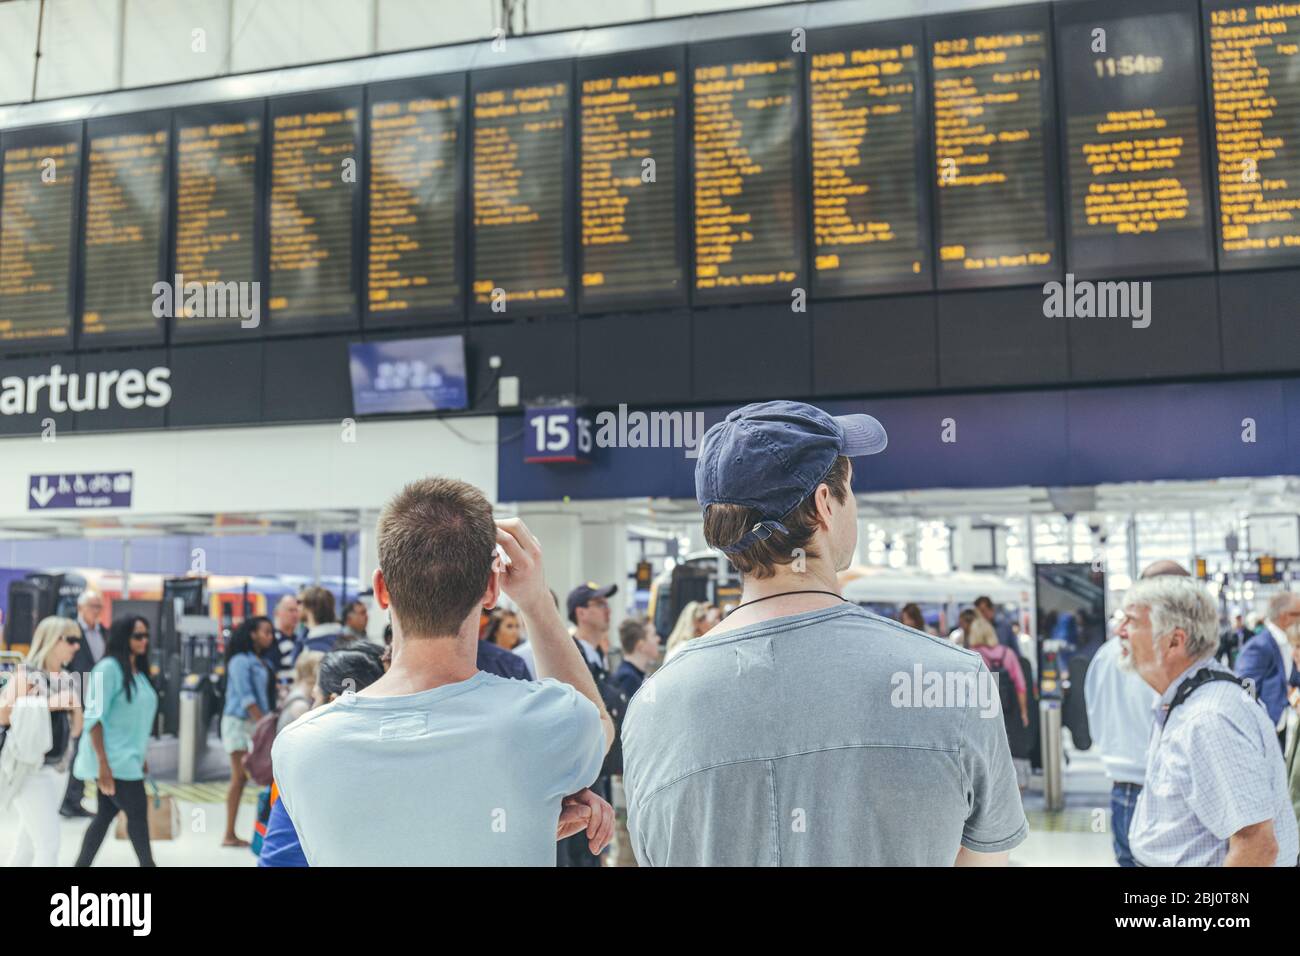 London/UK-1/8/19:young men waiting for their train at the London Waterloo station in a rush-hour. Central London terminus on the National Rail network Stock Photo